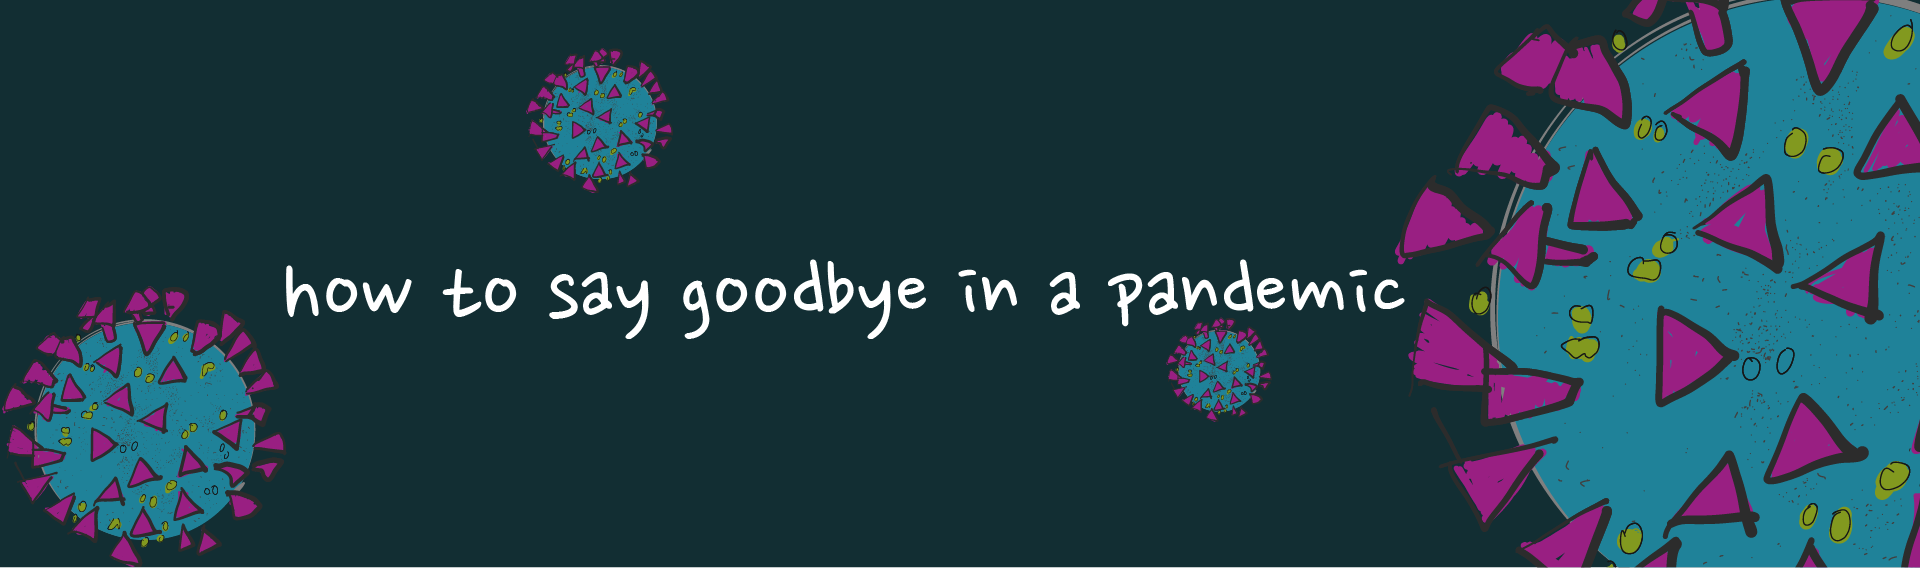 How to say Goodbye in a Pandemic